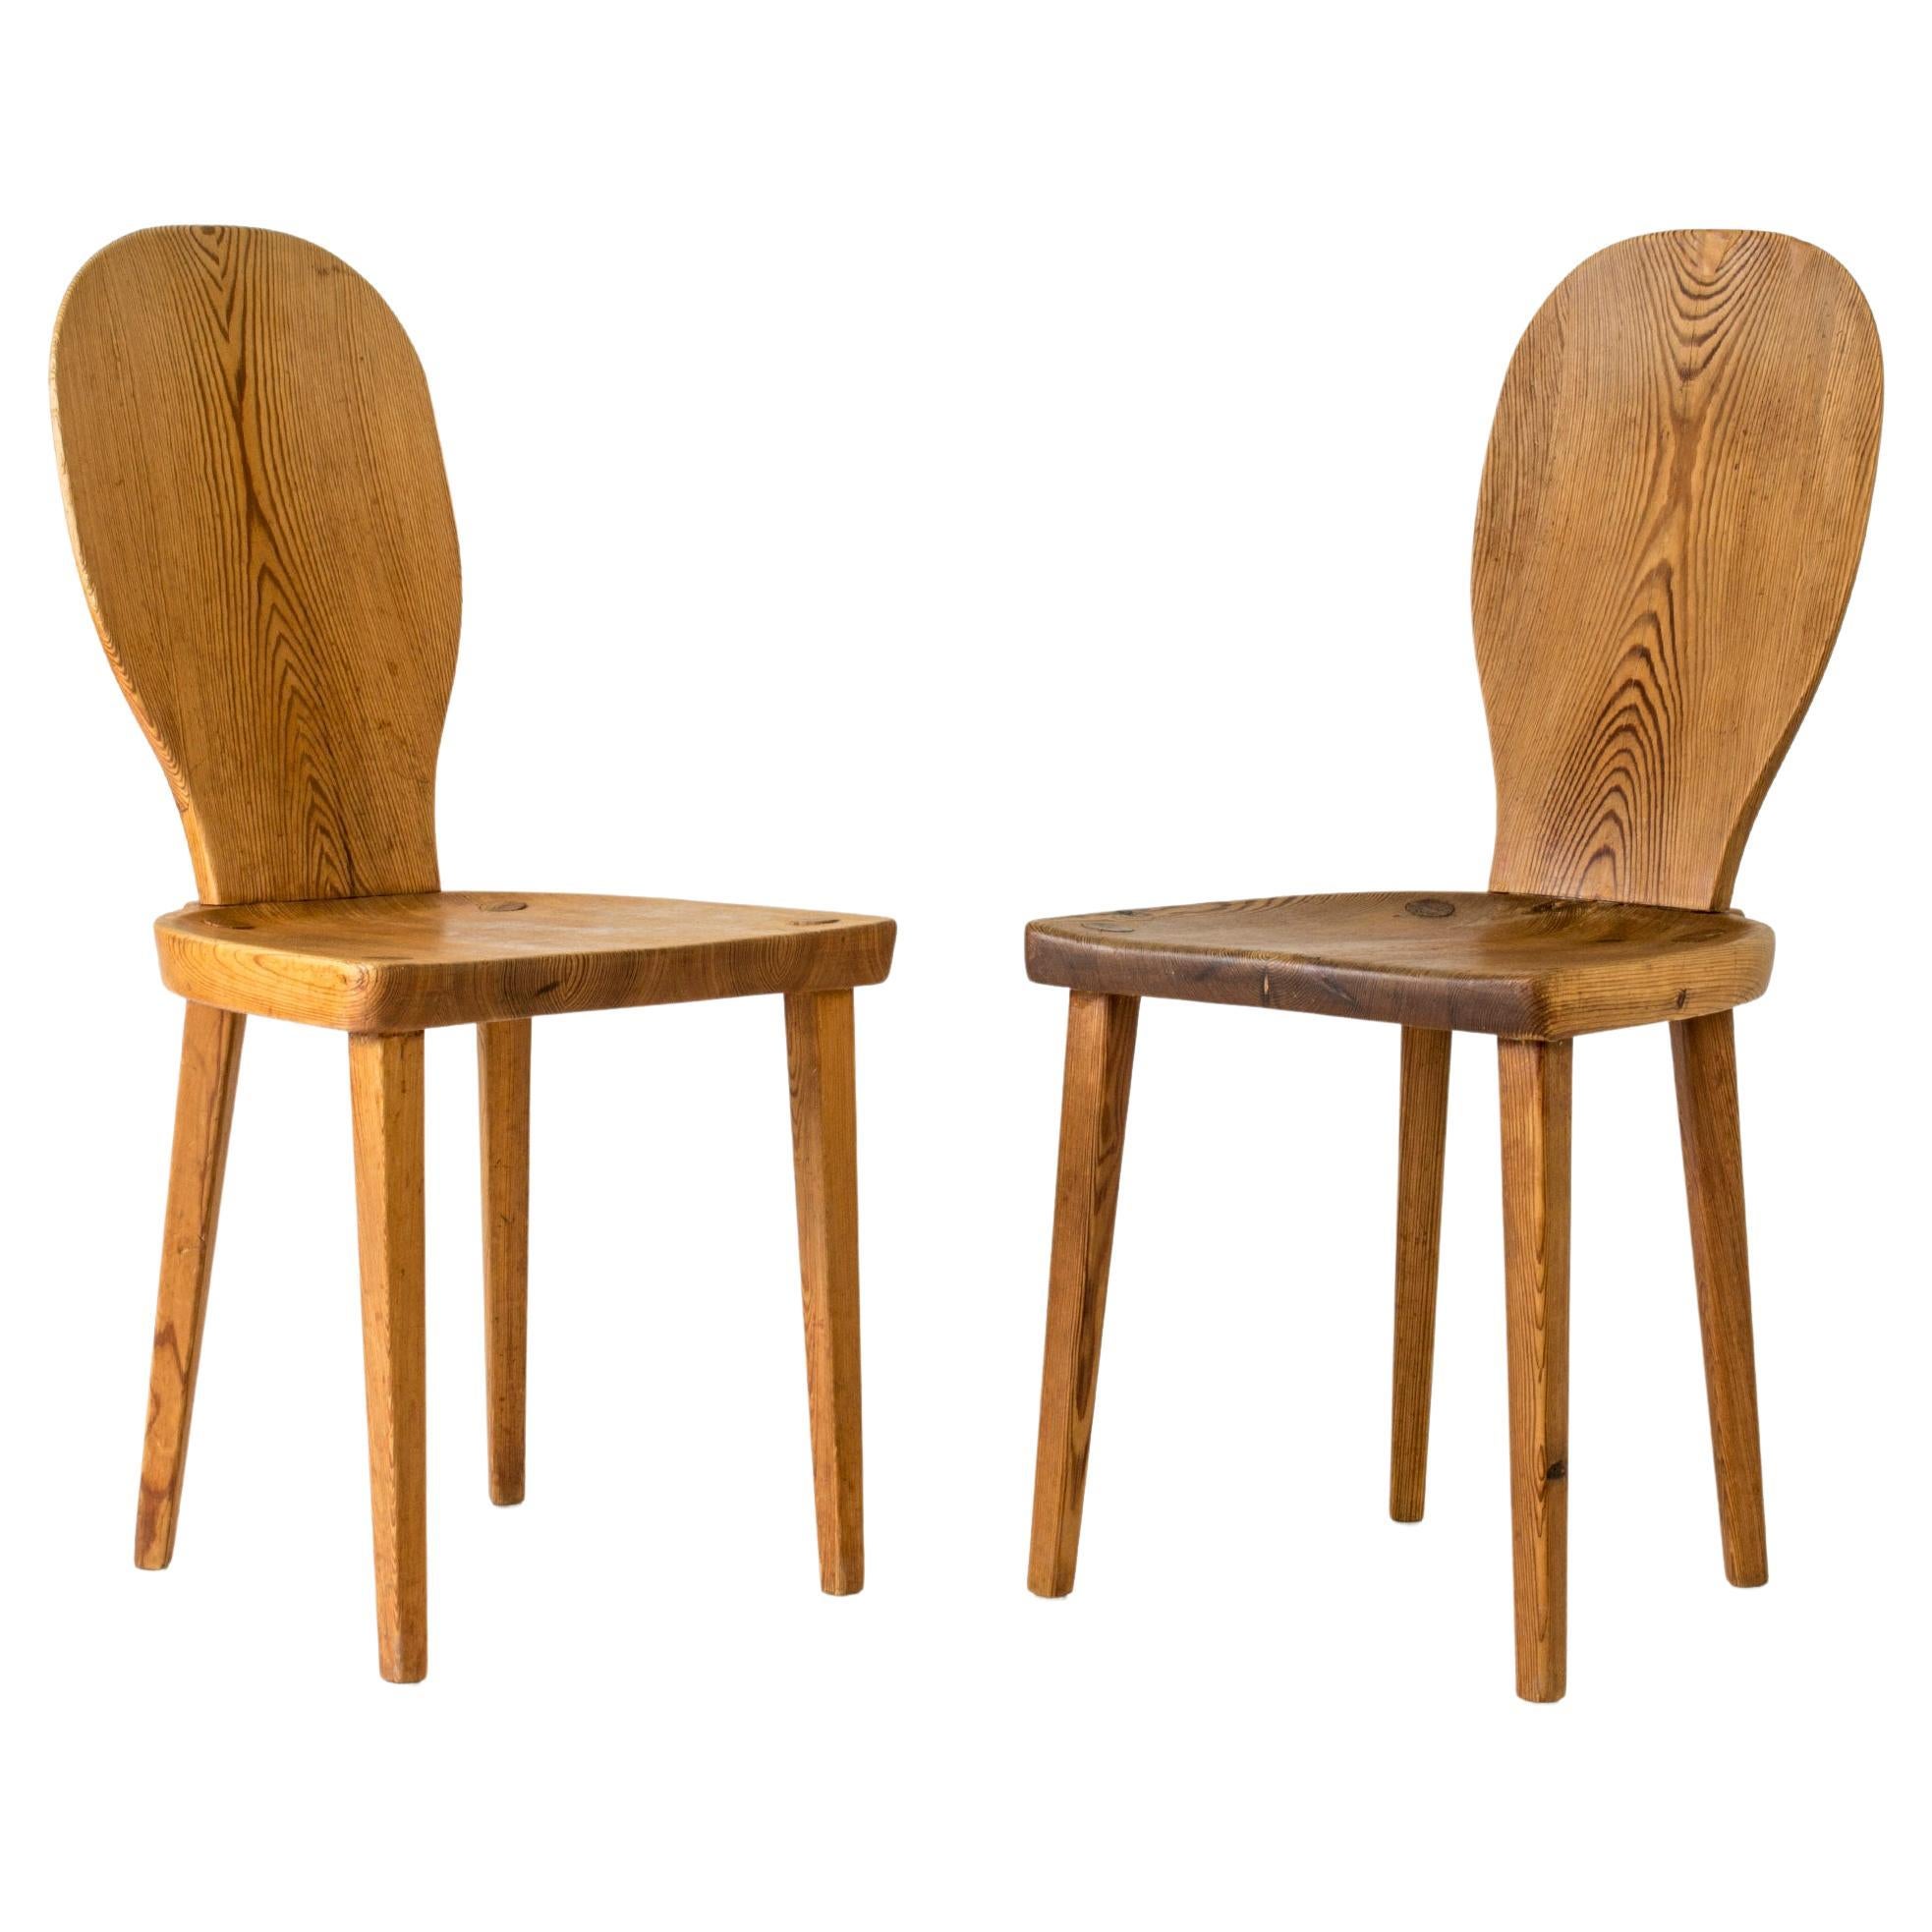 Pair of "Spoon" Side Chairs by Carl Malmsten, Sweden, 1930s